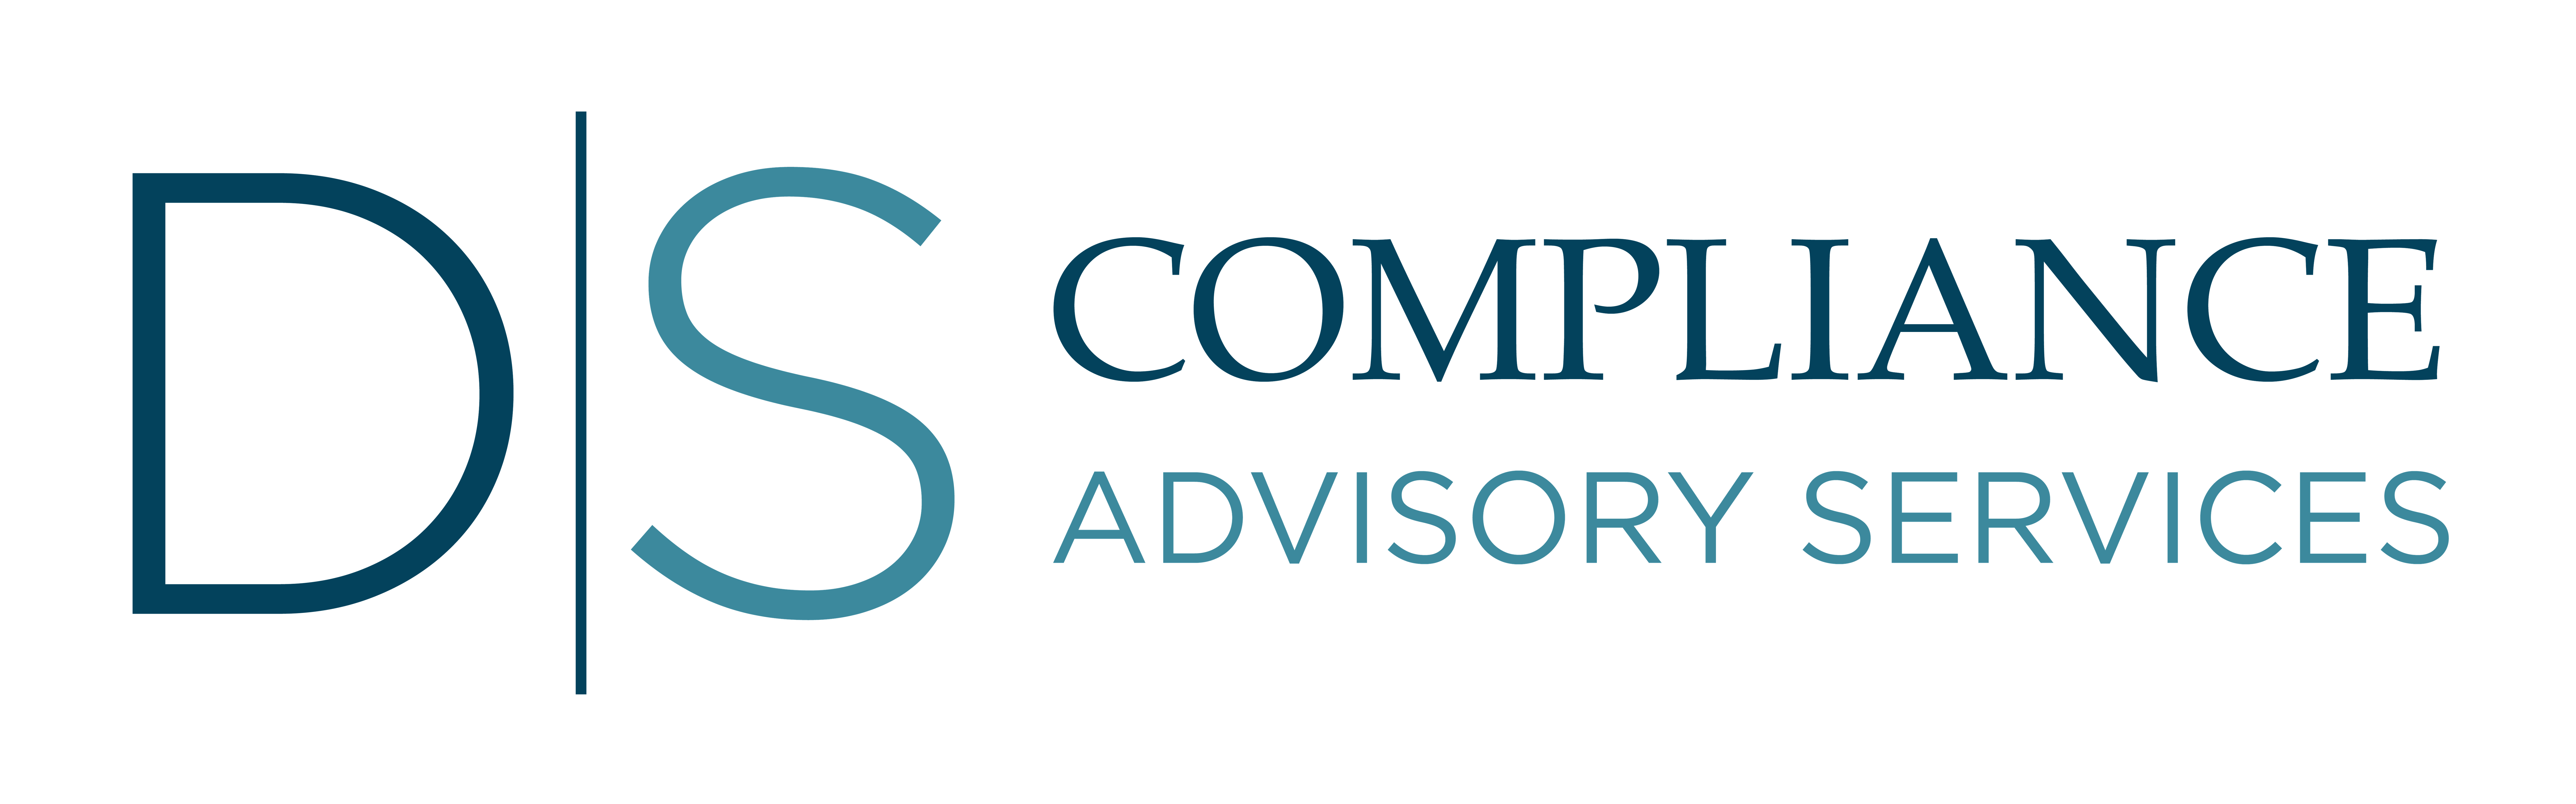 DS Compliance Advisory Services by Elisa Da Silva Luxembourg